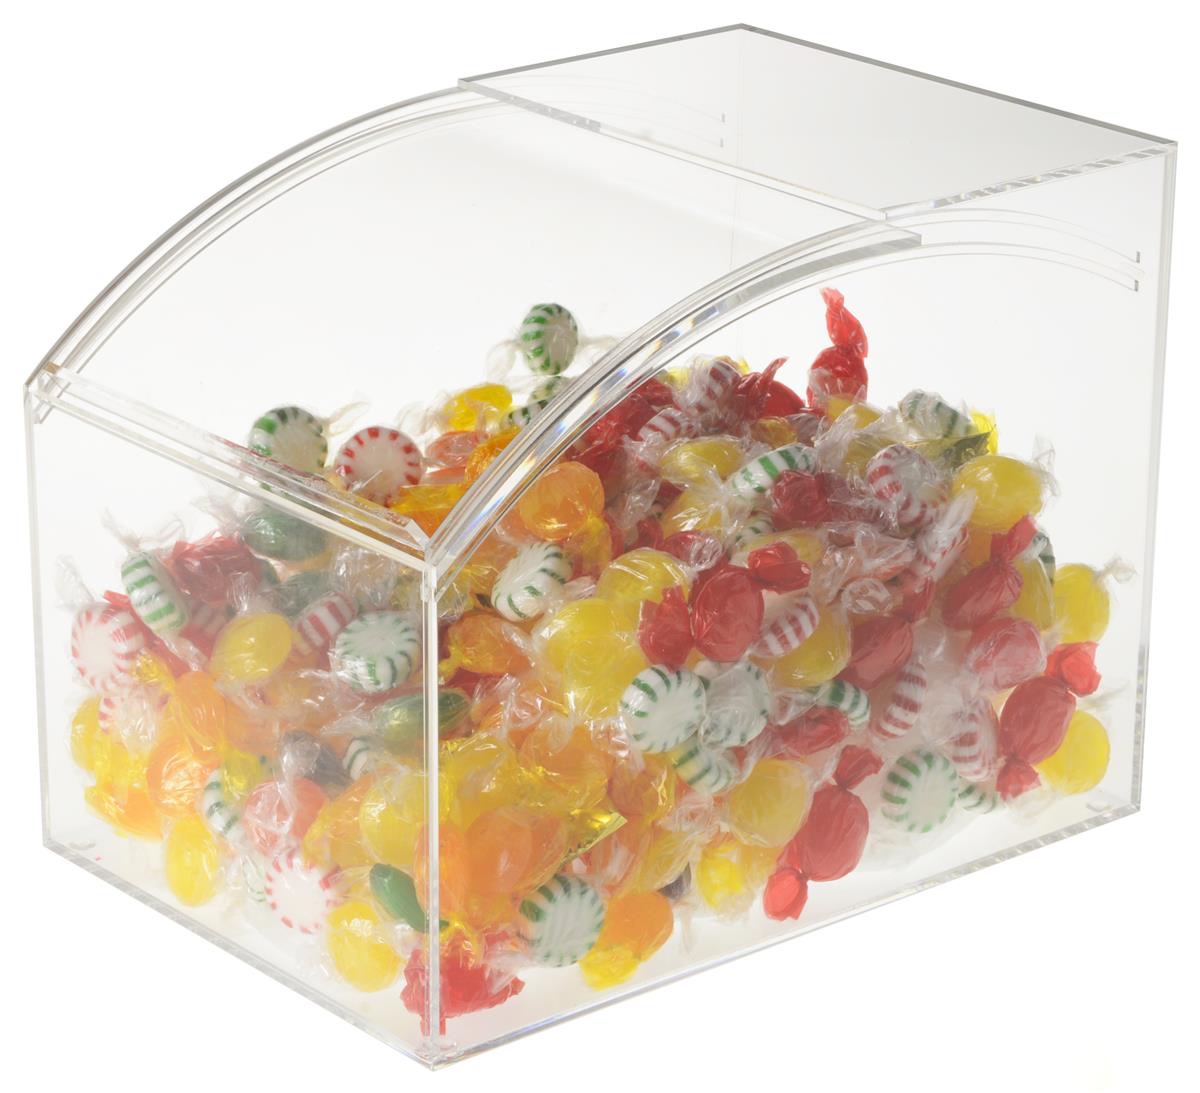 Countertop Clear Acrylic Container Candy Box Manufacturers, Countertop Clear Acrylic Container Candy Box Factory, Supply Countertop Clear Acrylic Container Candy Box